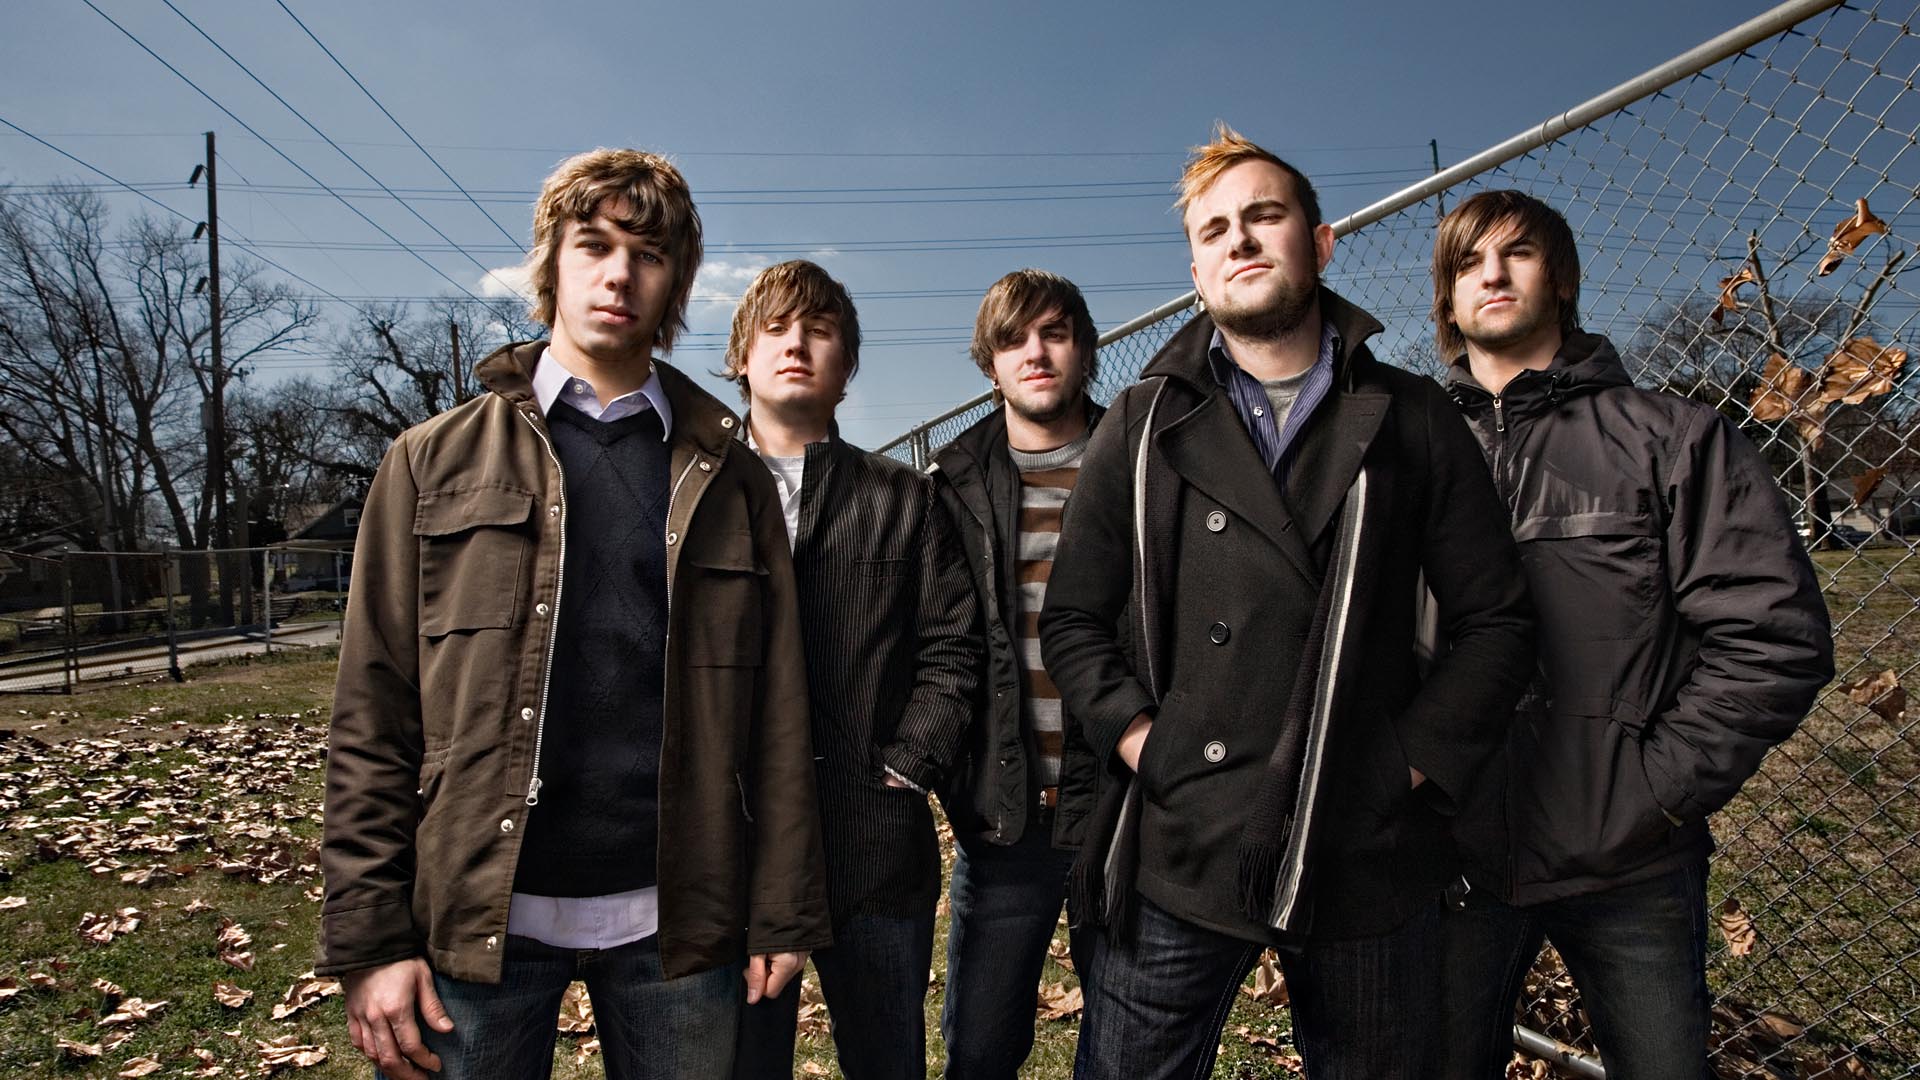 Amazing August Burns Red Pictures & Backgrounds